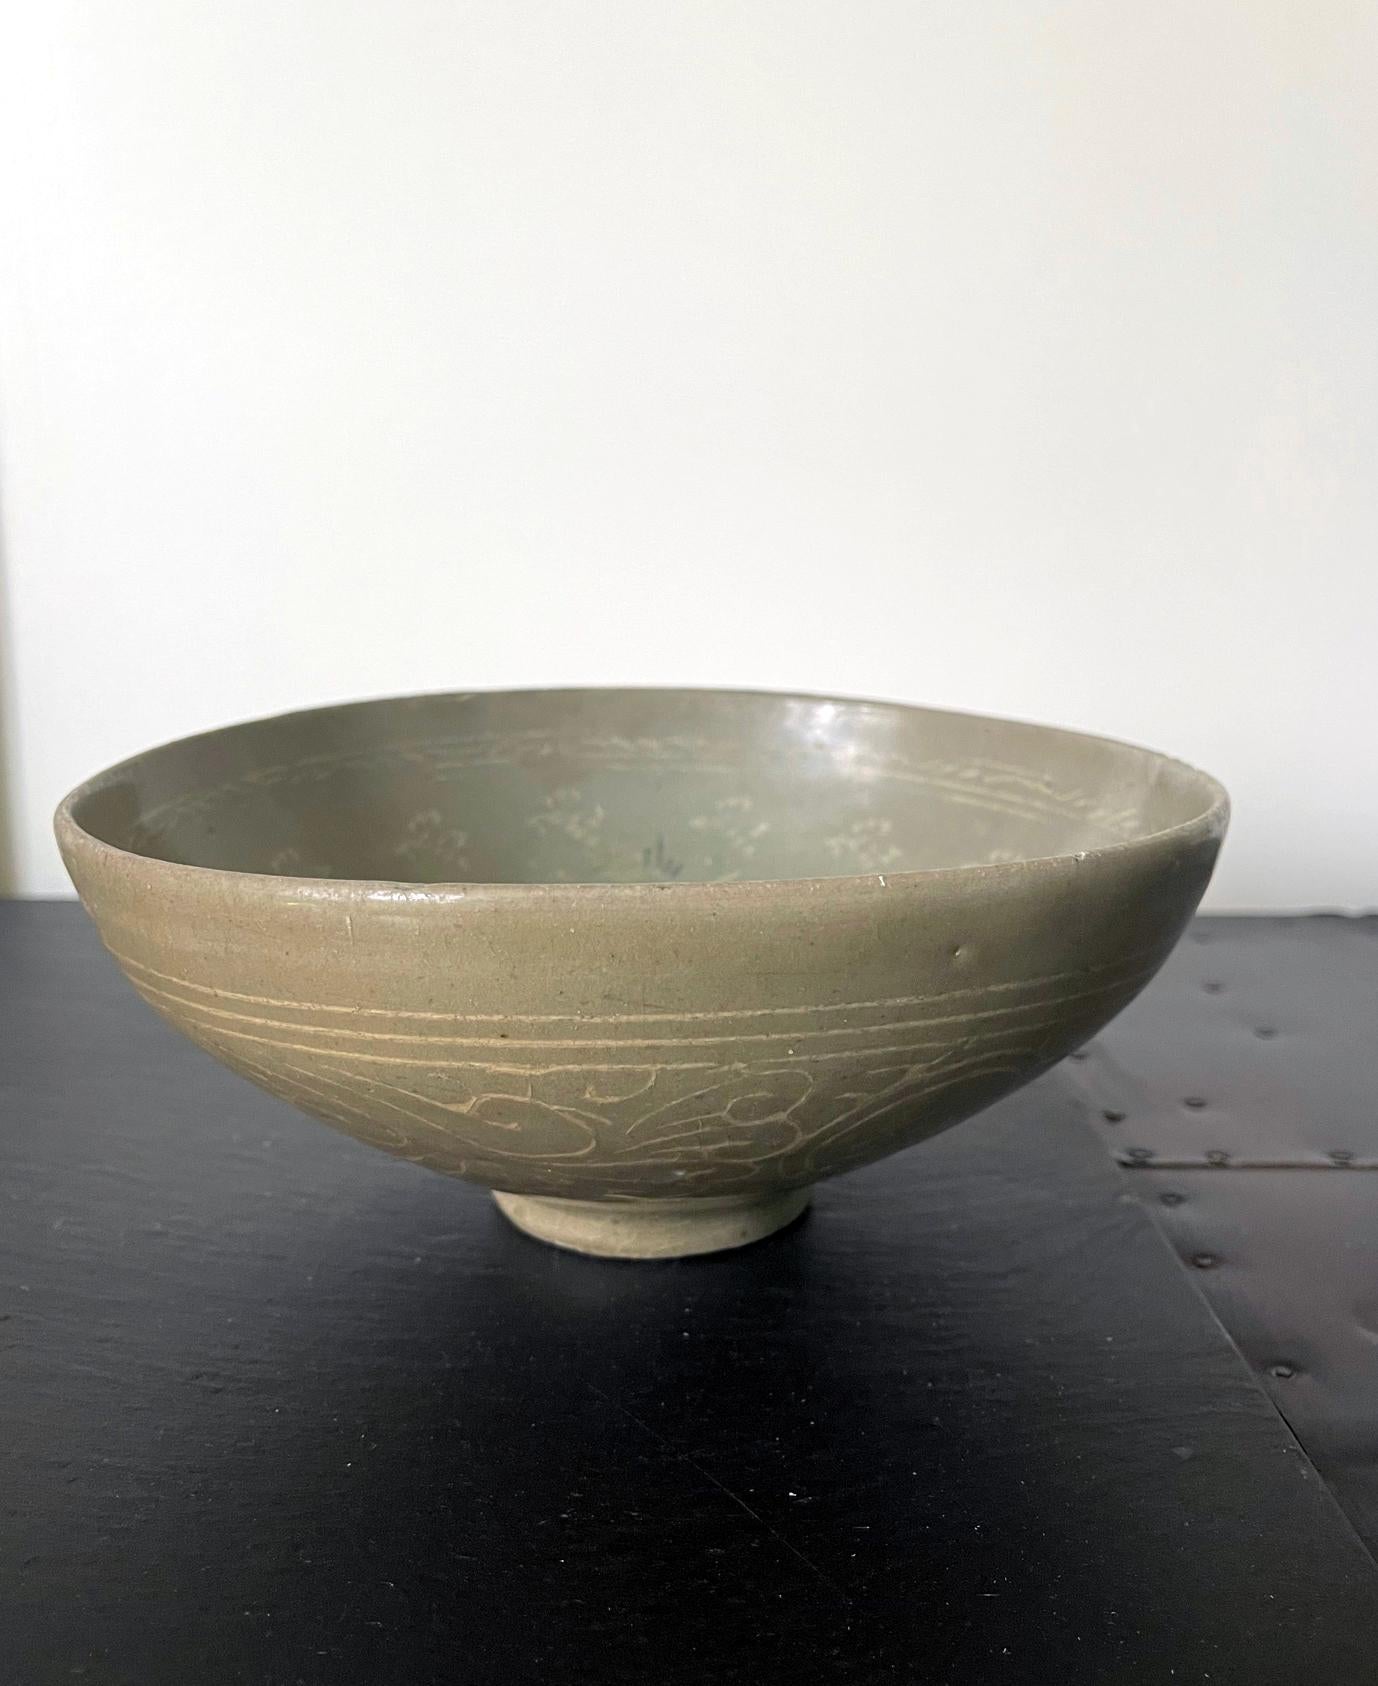 A good Korean celadon bowl with elaborate slip inlays circa 12-13th century from the Goryeo Dynasties (918 to 1392AD). Despite inspired originally by the celadons from Song Dynasty in China, the development of celadon in Korean peninsula took its